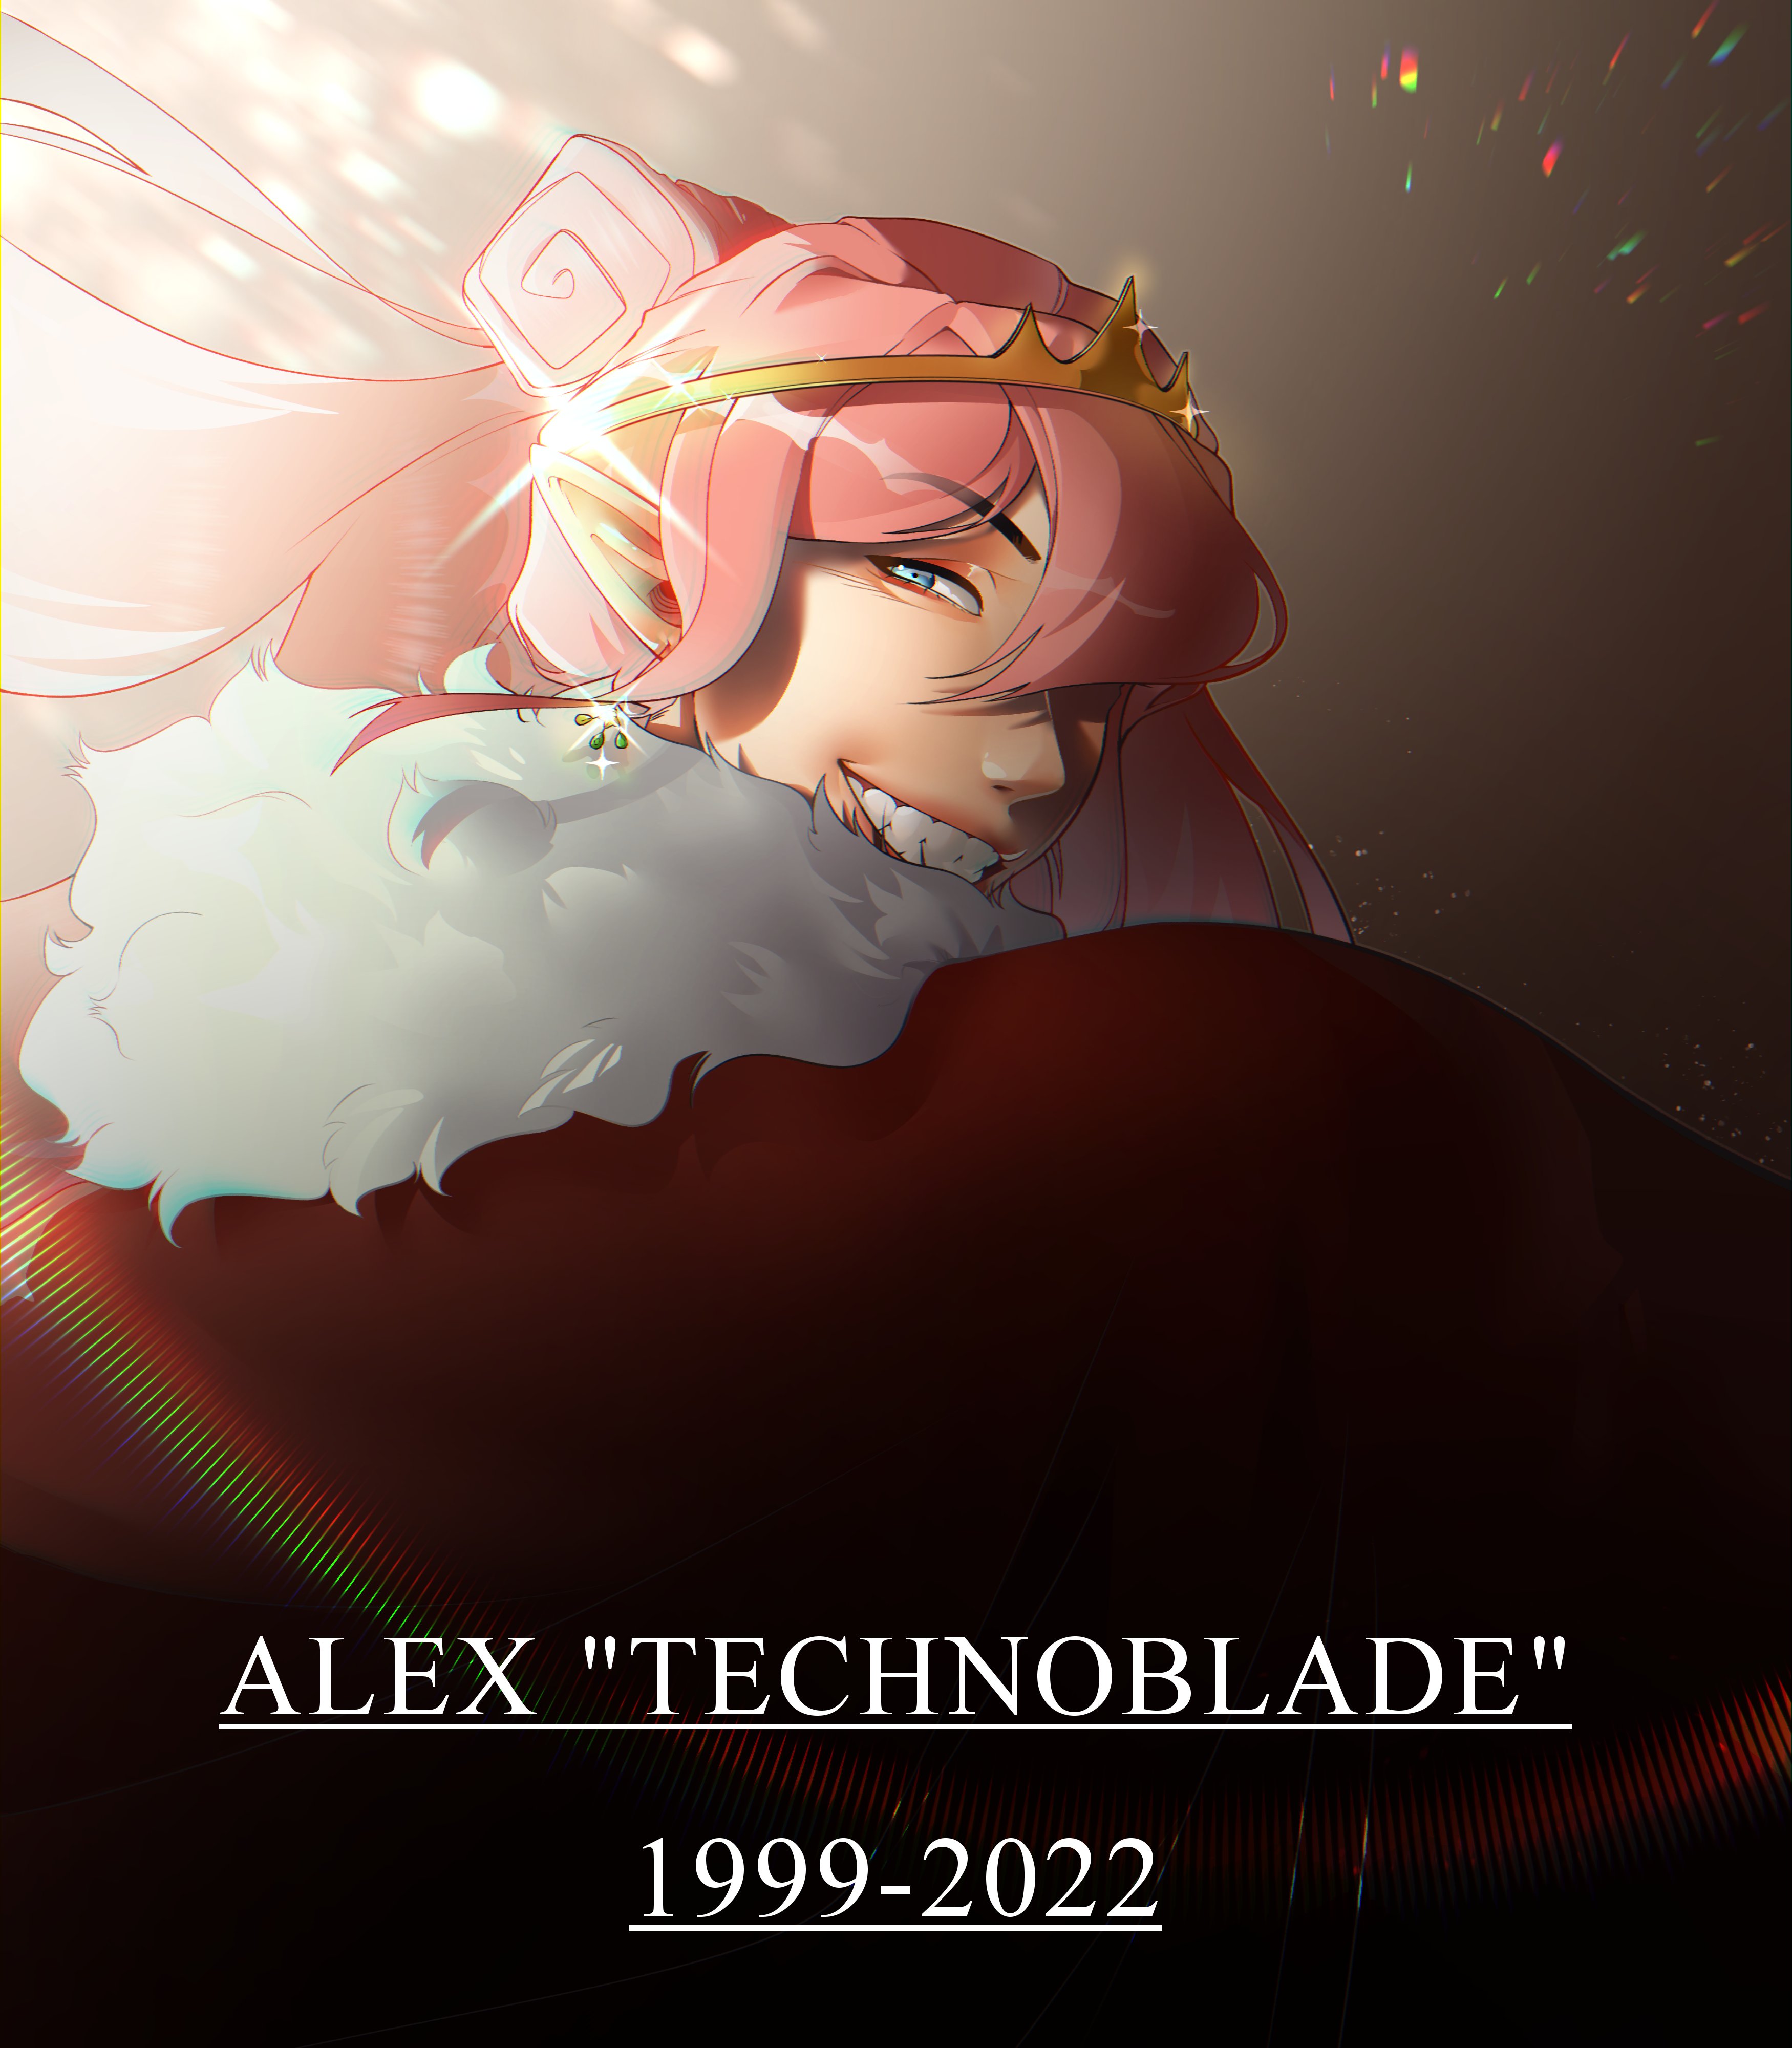 Technoblade never dies. Rest in peace, king. : r/Technoblade